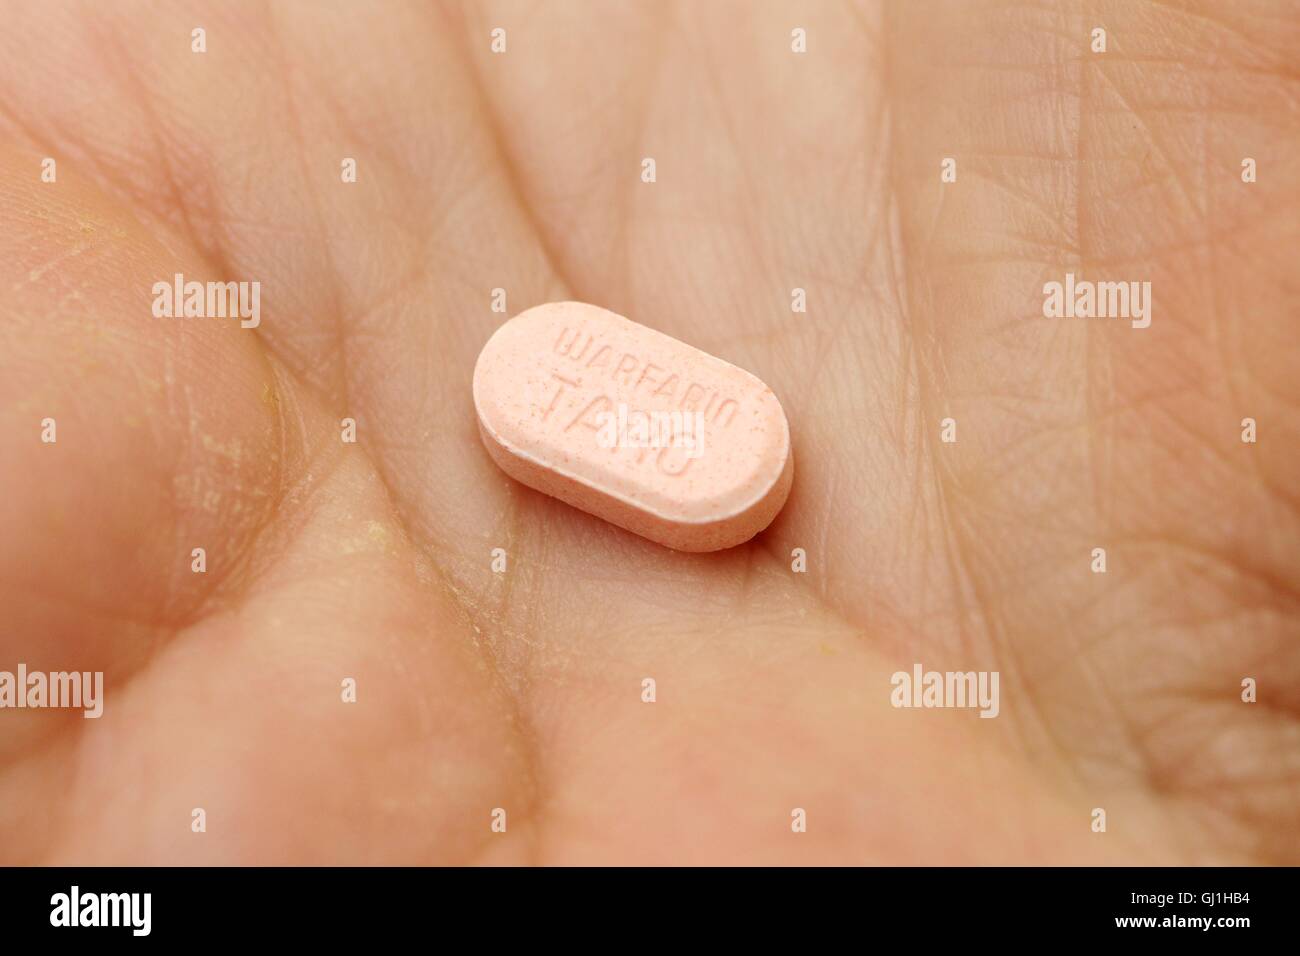 5mg warfarin tablet, the generic form of Coumadin, an anticoagulant. Stock Photo